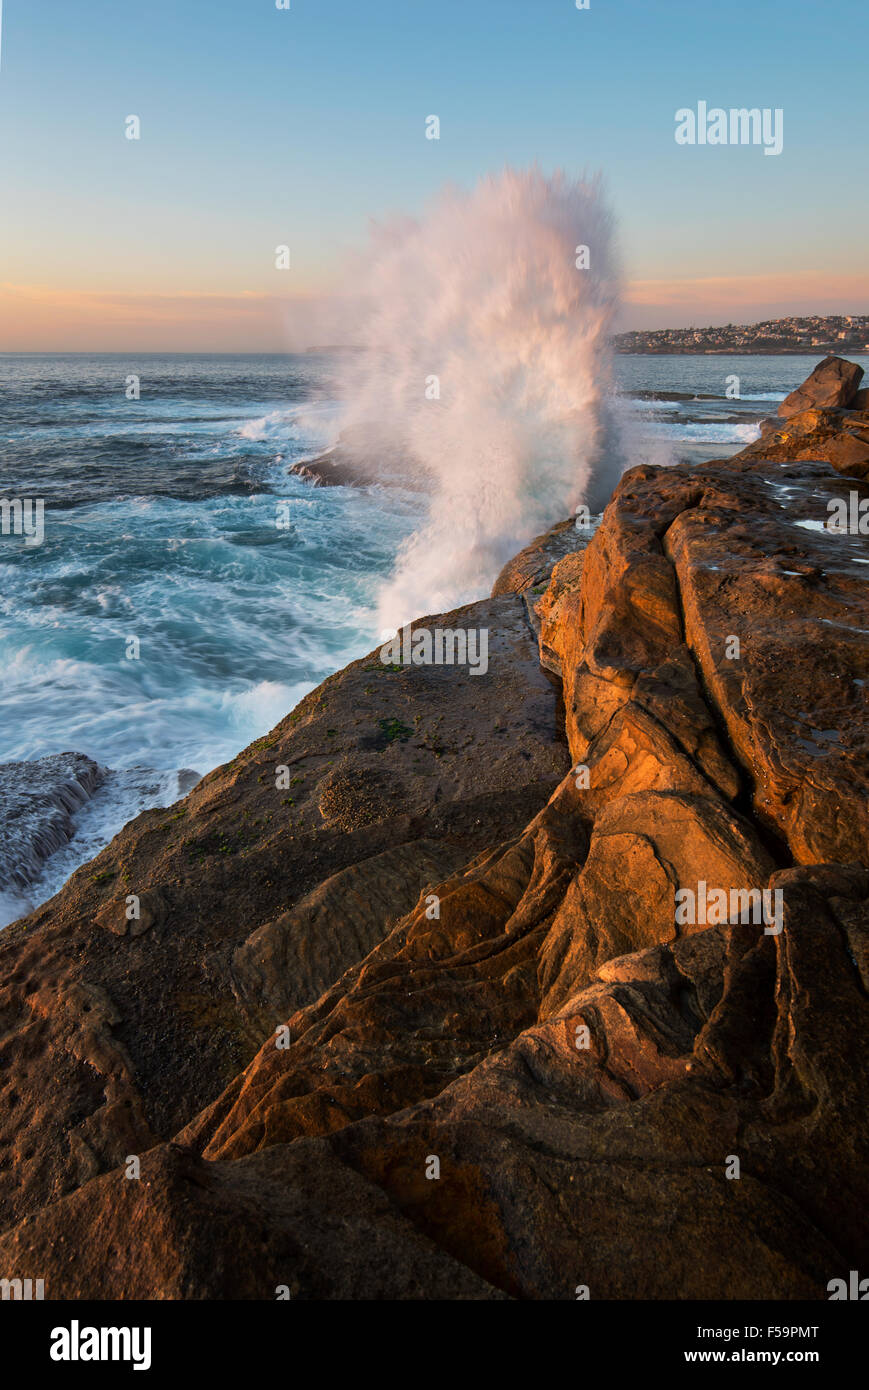 Sunrise seascape with unrest sea and blue water and with sky lit orange rocks and big crashing wave Stock Photo